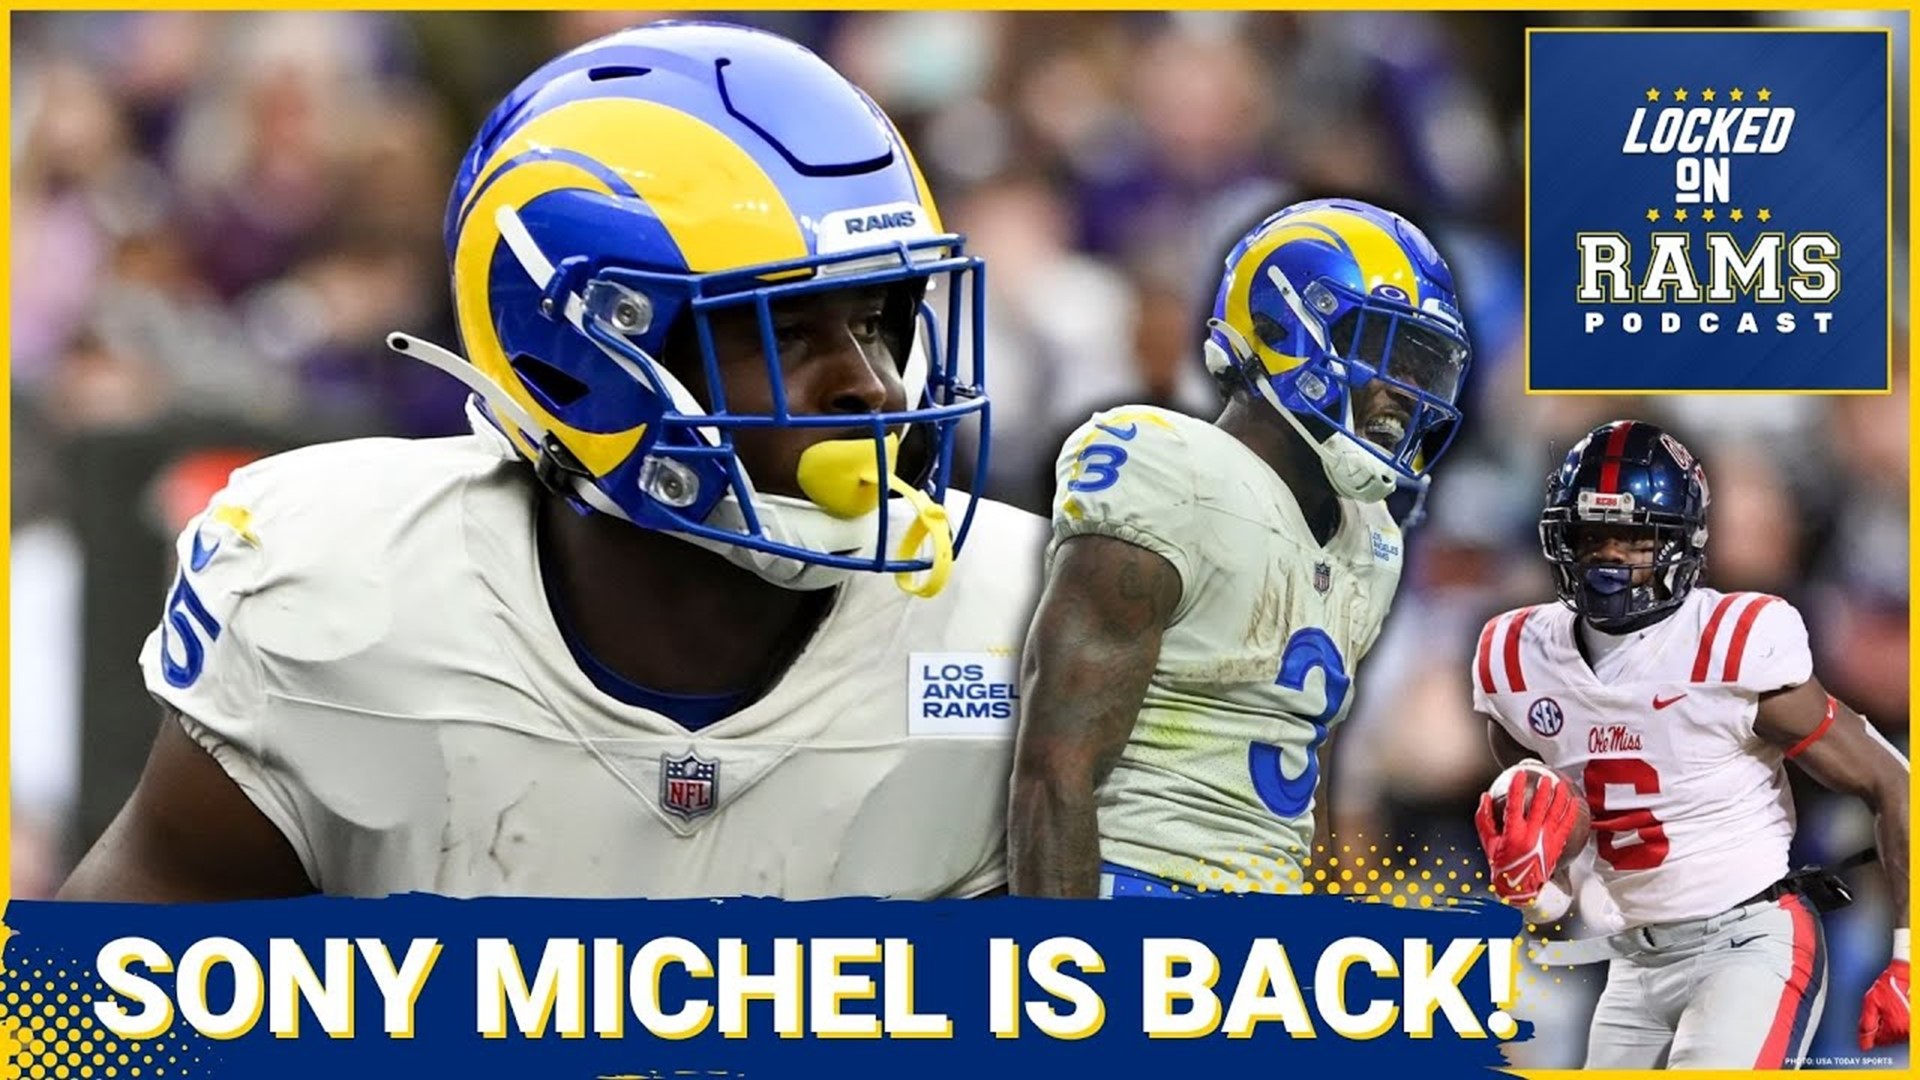 Rams Sign Sony Michel, Which Rams RB Will Get Cut, Impact on Cam Akers,  Zach Evans Star Potential